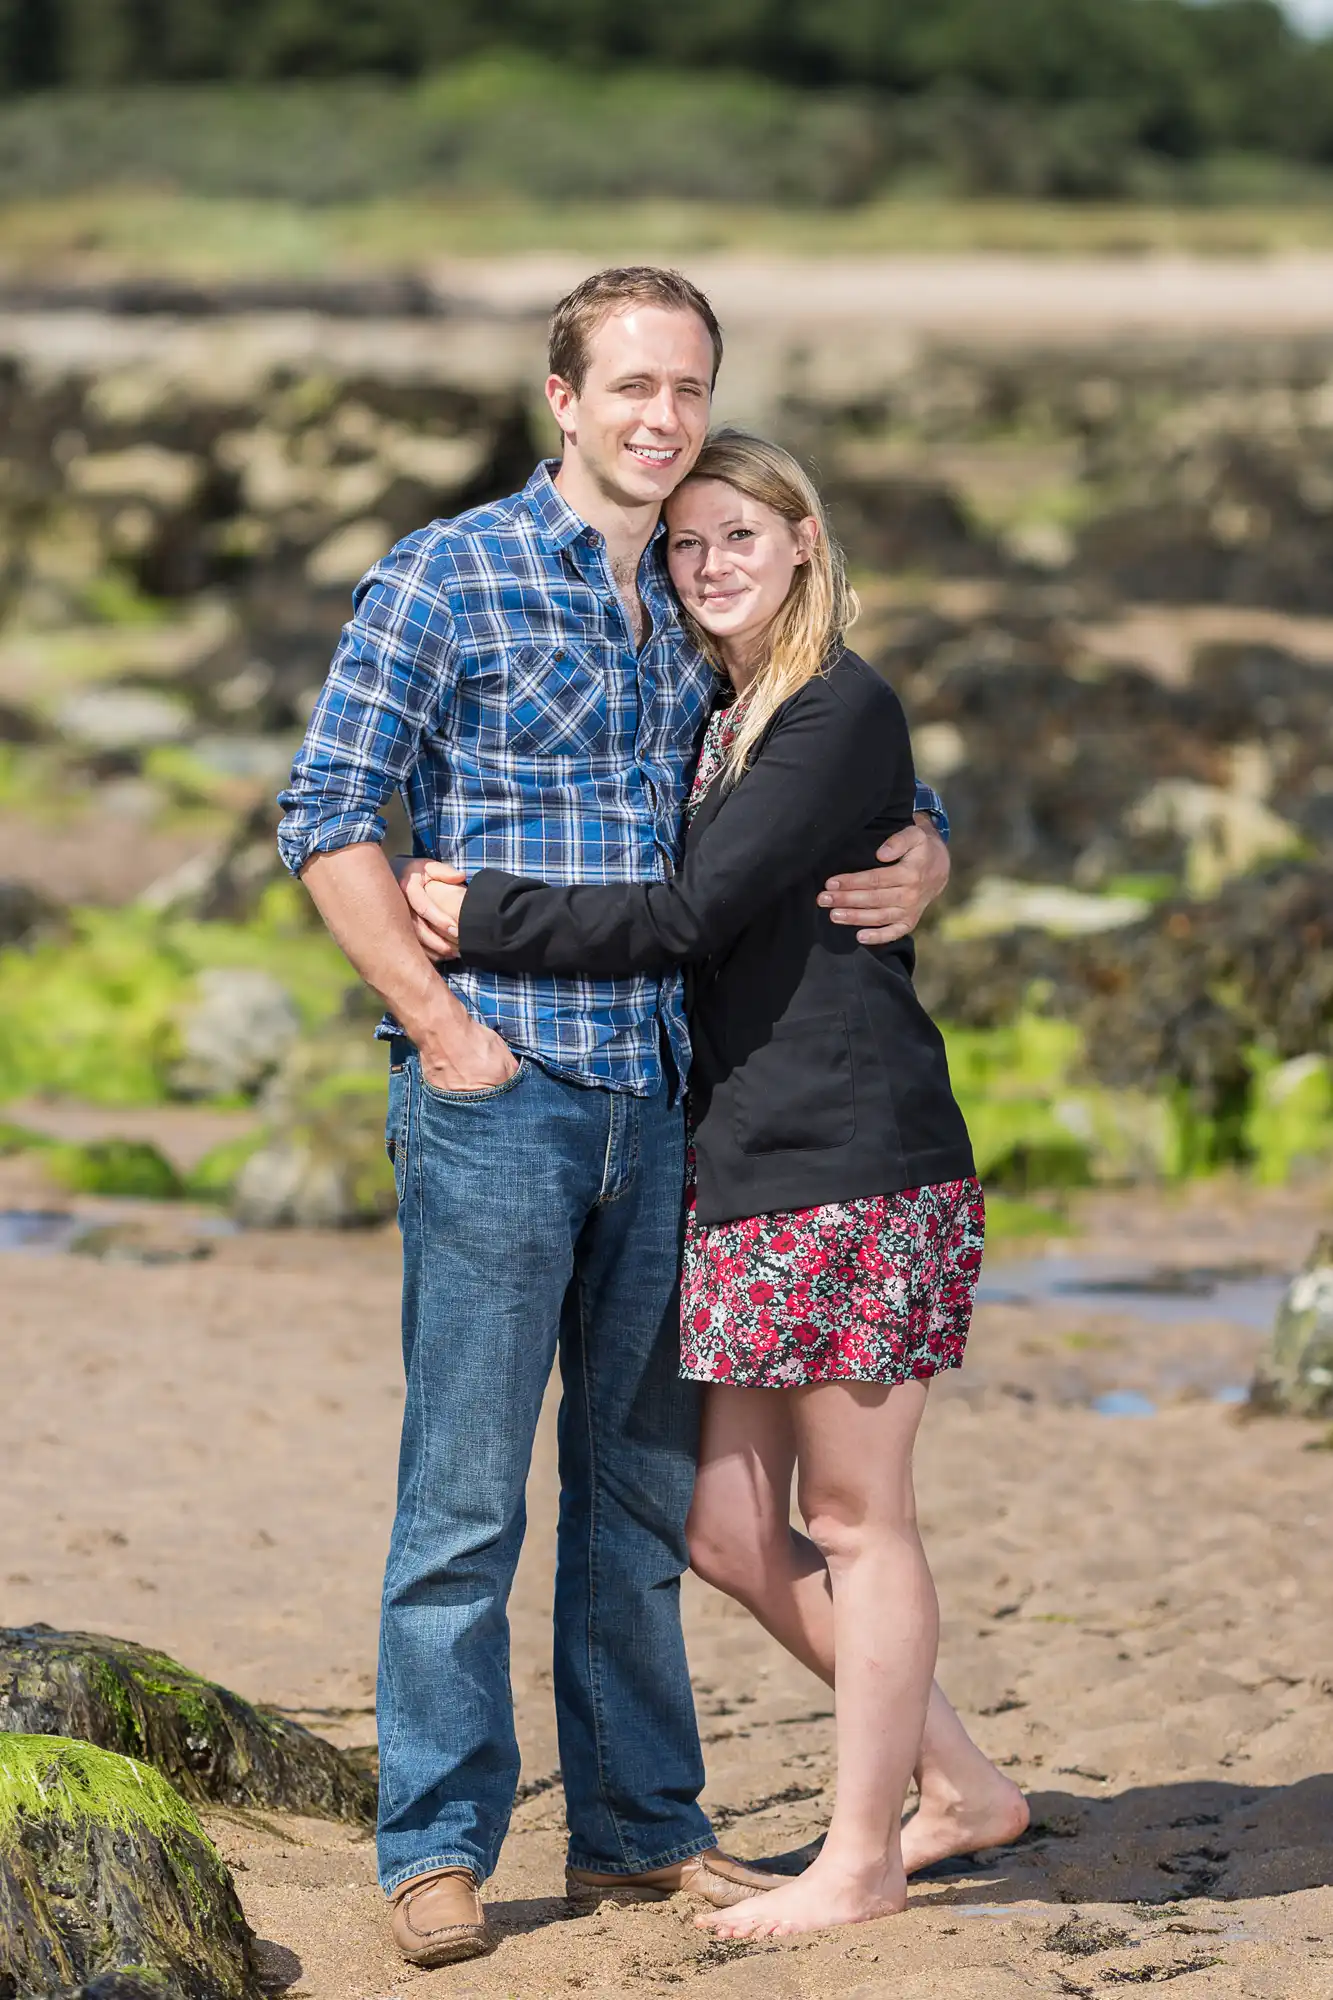 A couple embracing on a sandy beach, smiling at the camera, with ocean and rocks in the background. the man is wearing a plaid shirt and jeans; the woman is in a black jacket and floral skirt.